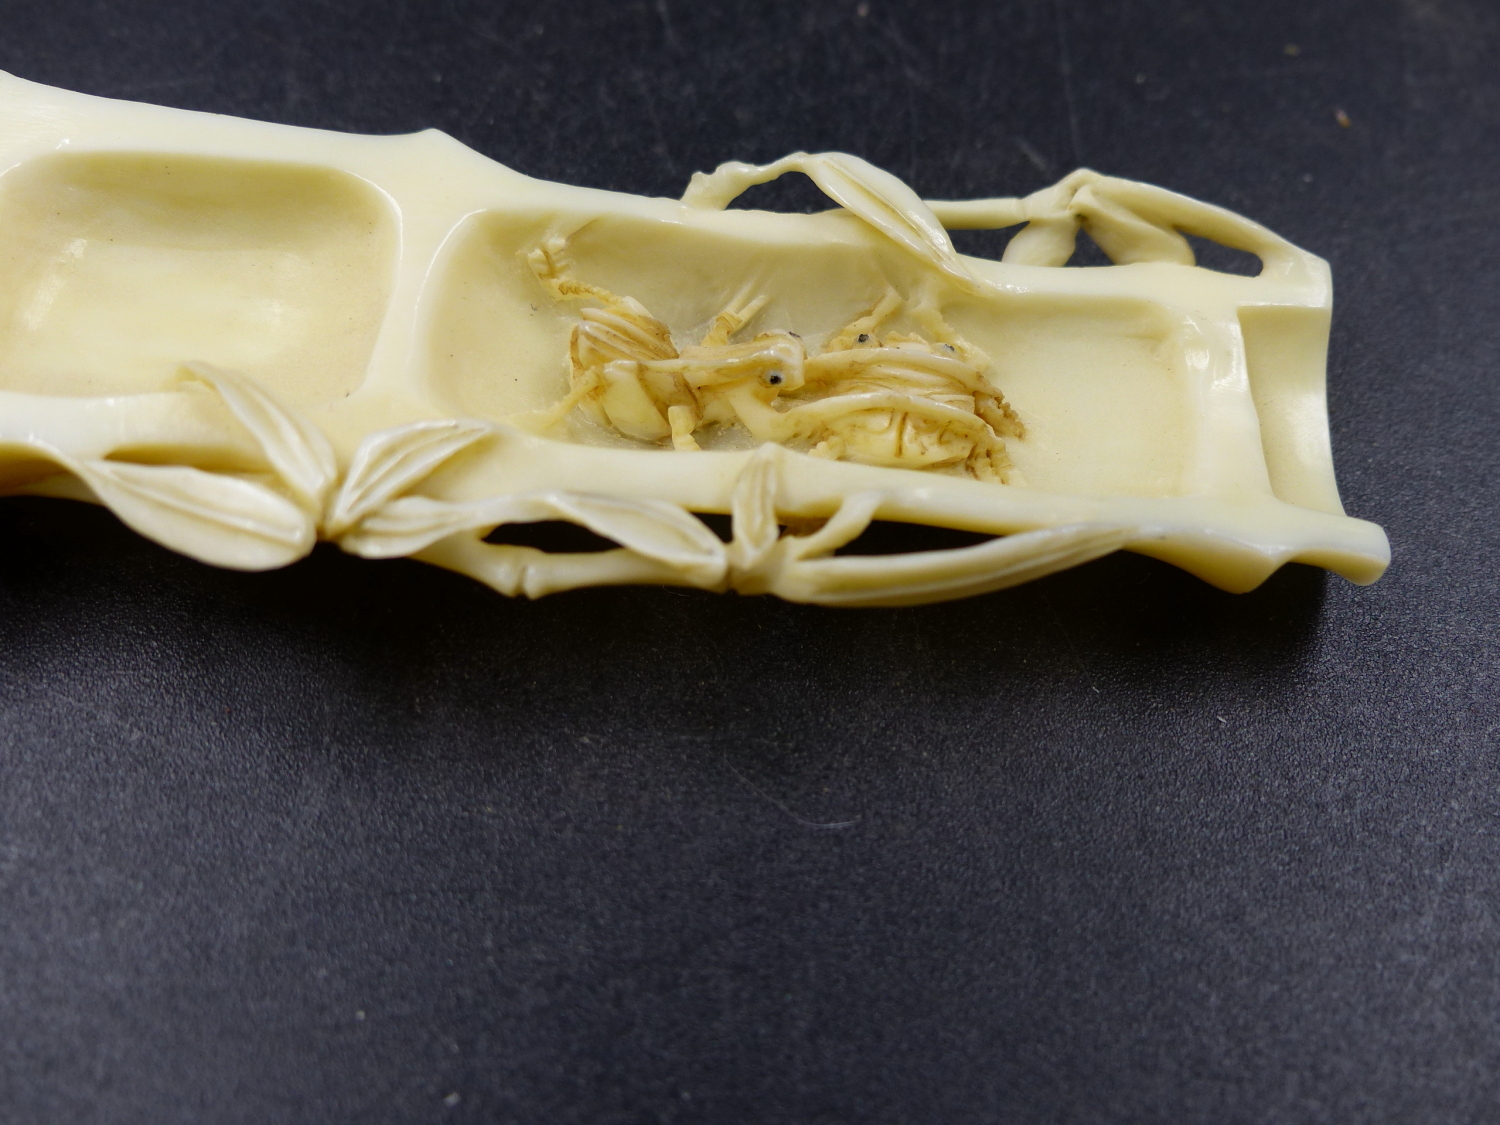 A JAPANESE MARINE IVORY OKIMONO CARVED AS A SPLIT SECTION OF BAMBOO CONTAINING A CONFRONTATION OF - Image 3 of 6